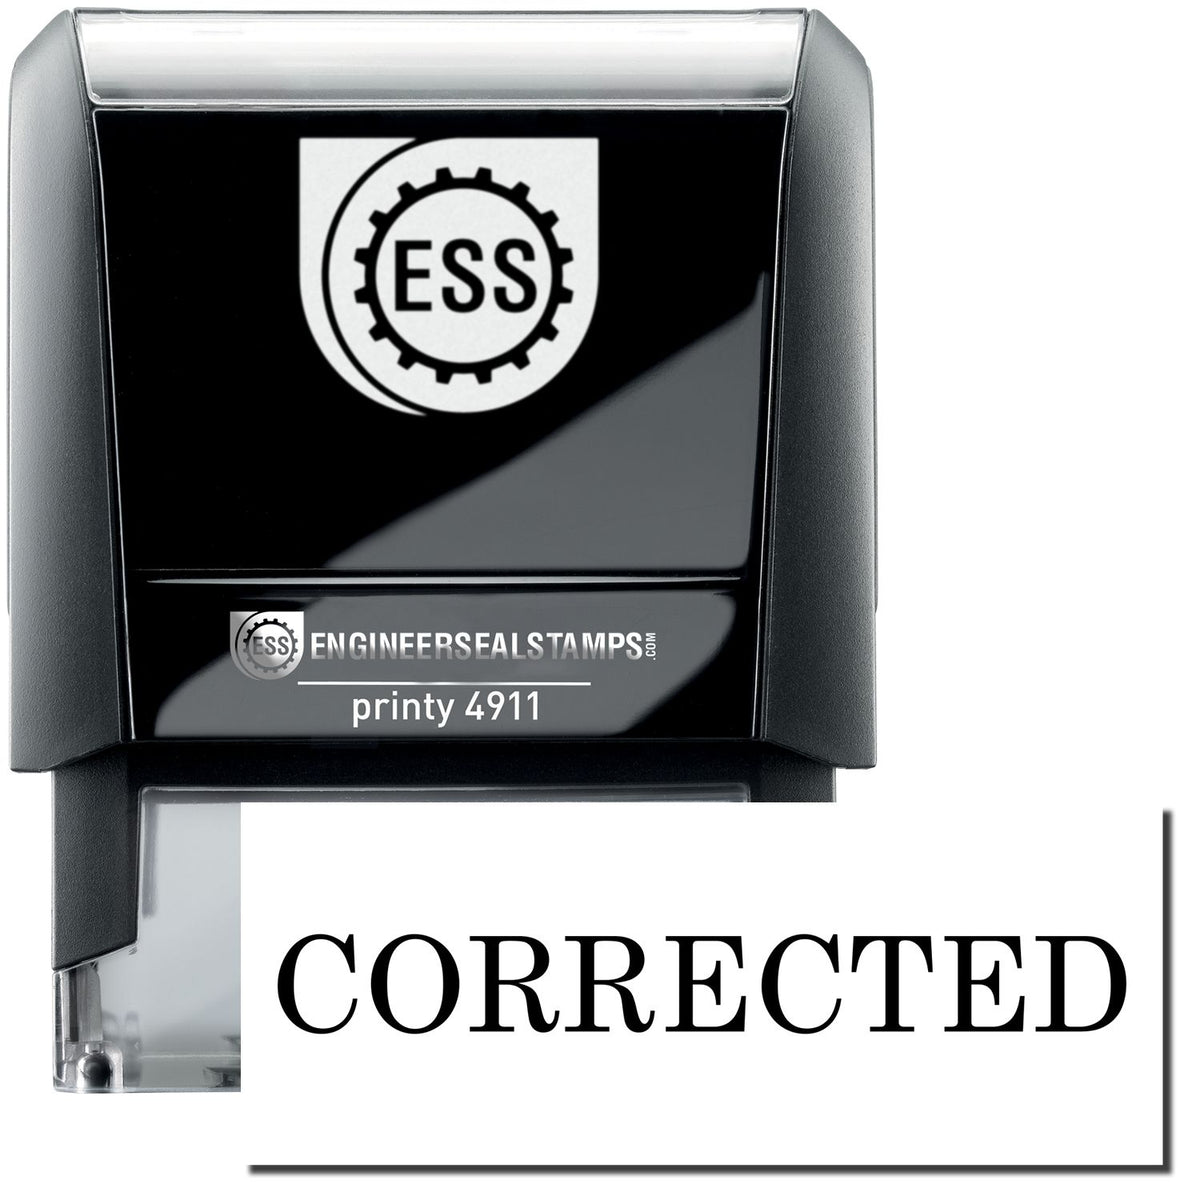 A self-inking stamp with a stamped image showing how the text &quot;CORRECTED&quot; is displayed after stamping.